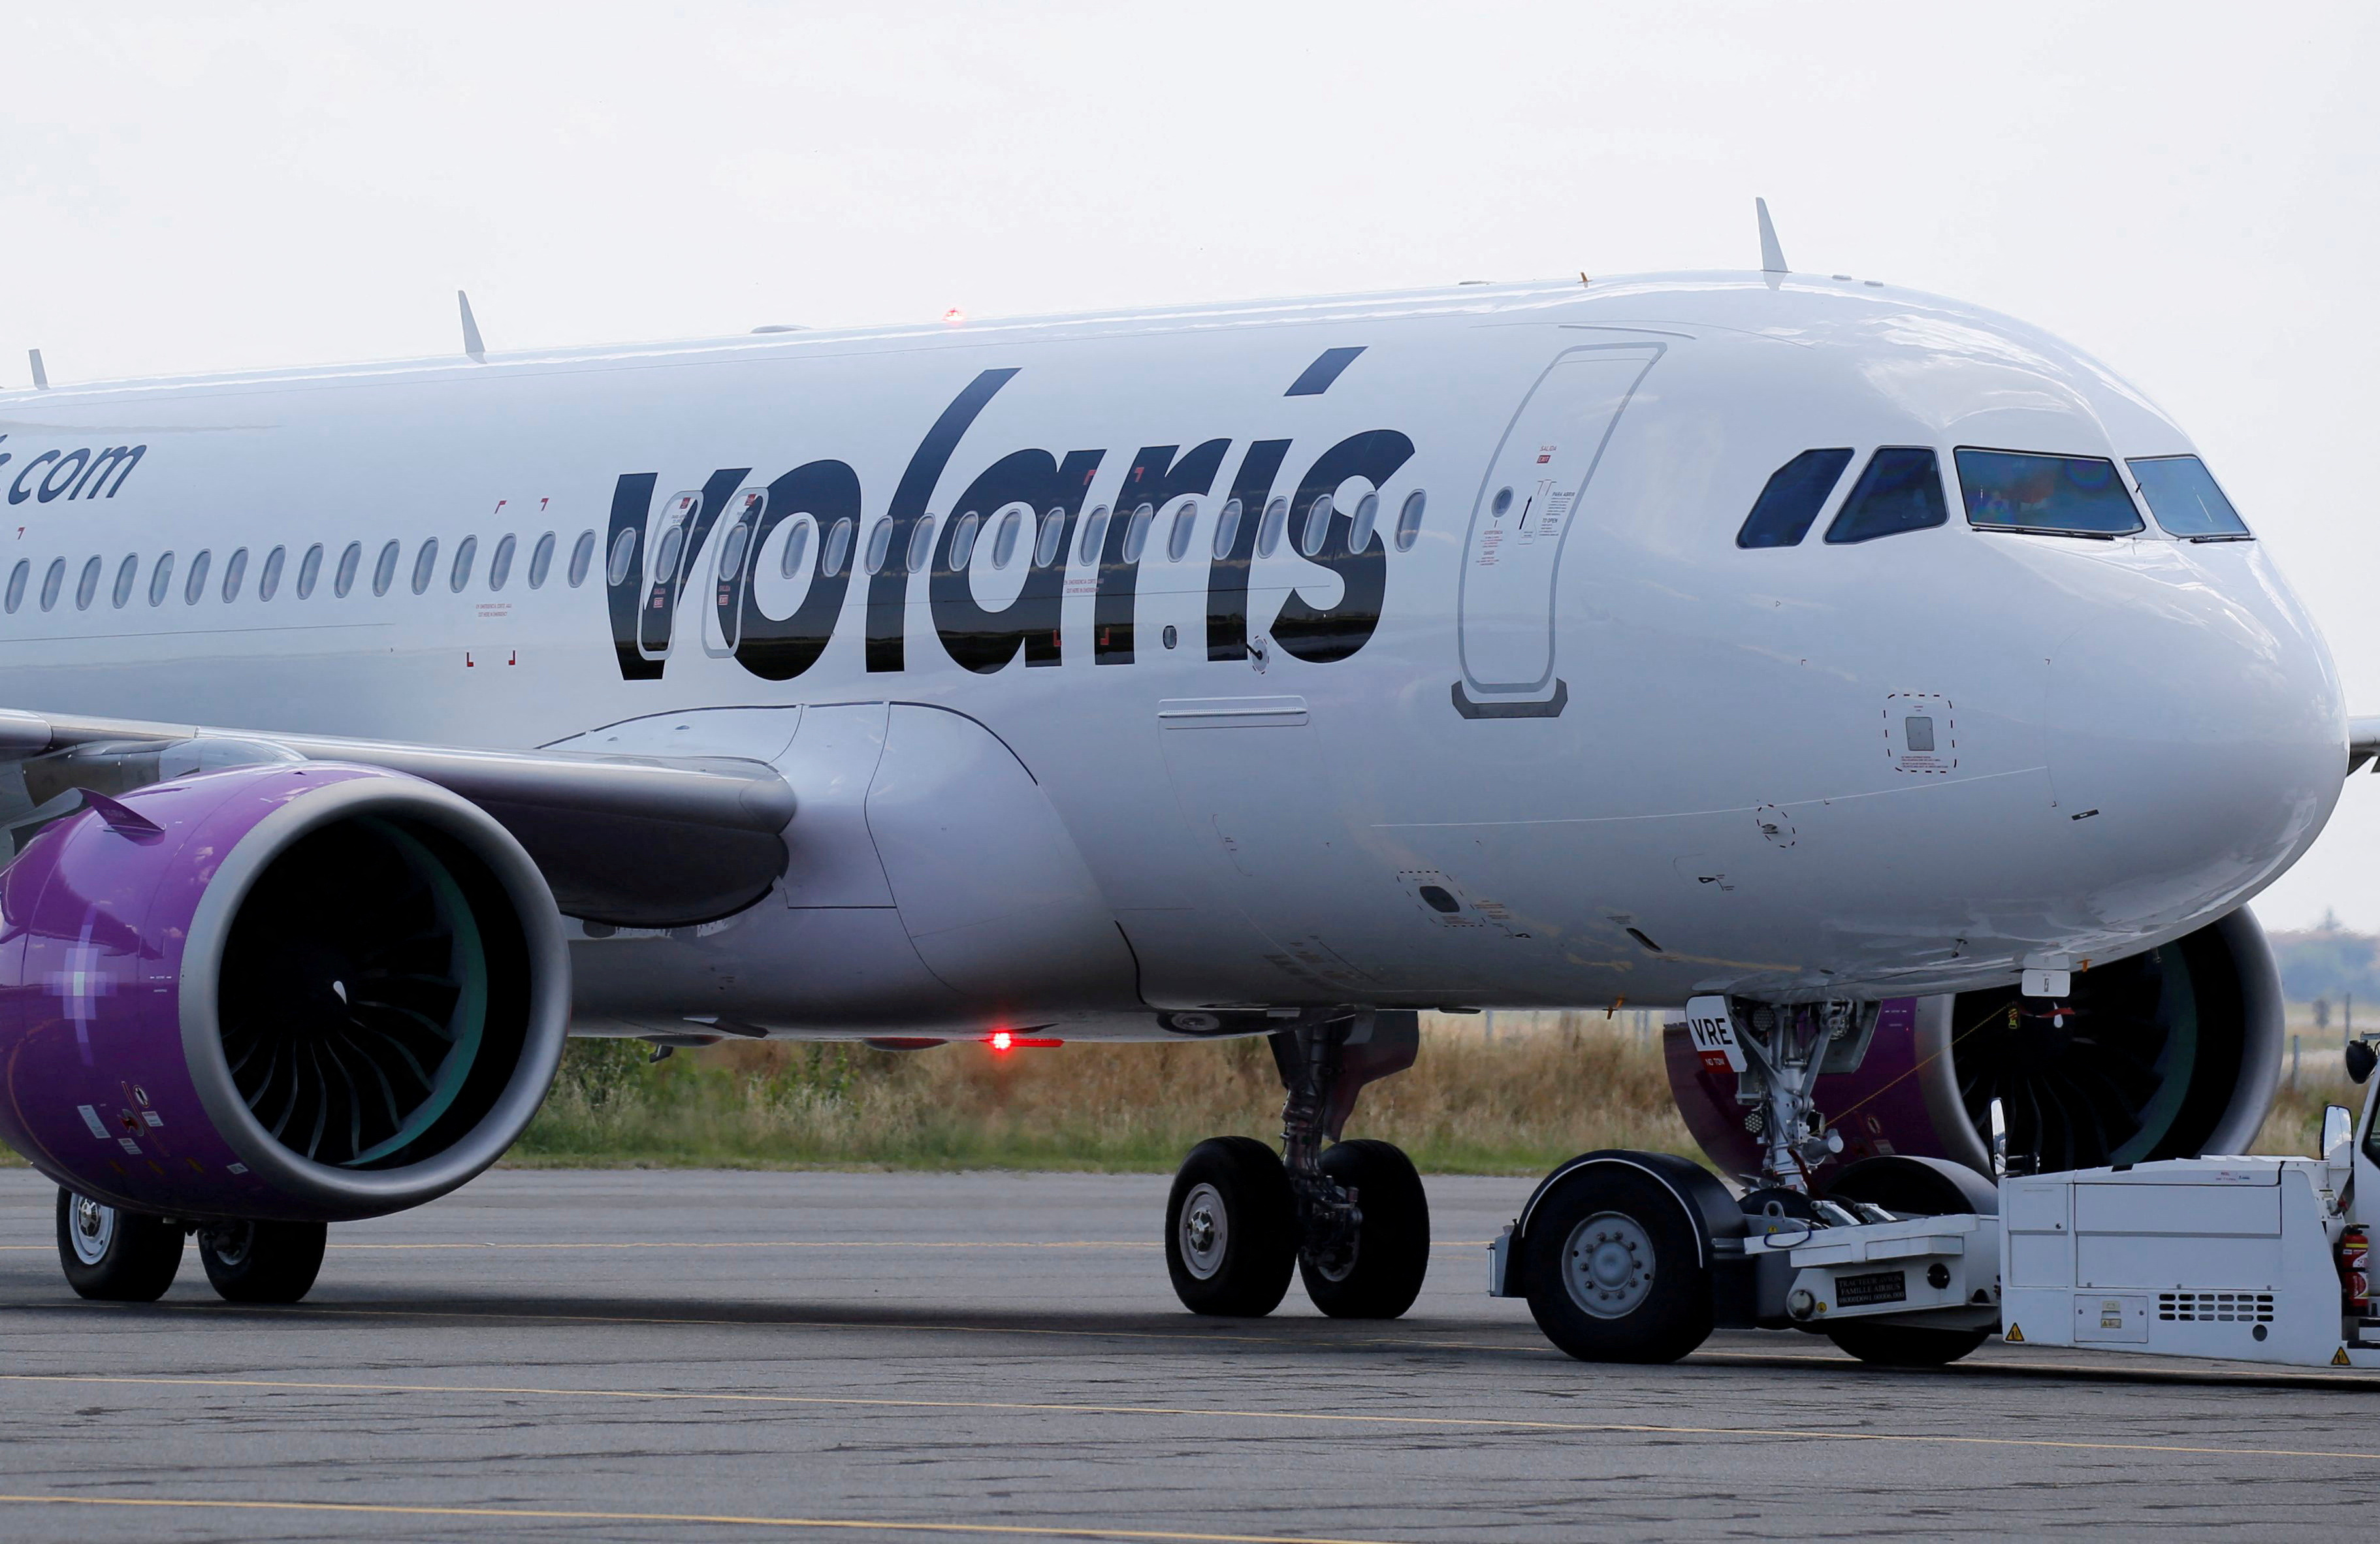 Am Airbus A320neo passenger aircraft of Mexican low-cost air carrier Volaris is pictured on the tarmac in Colomiers near Toulouse